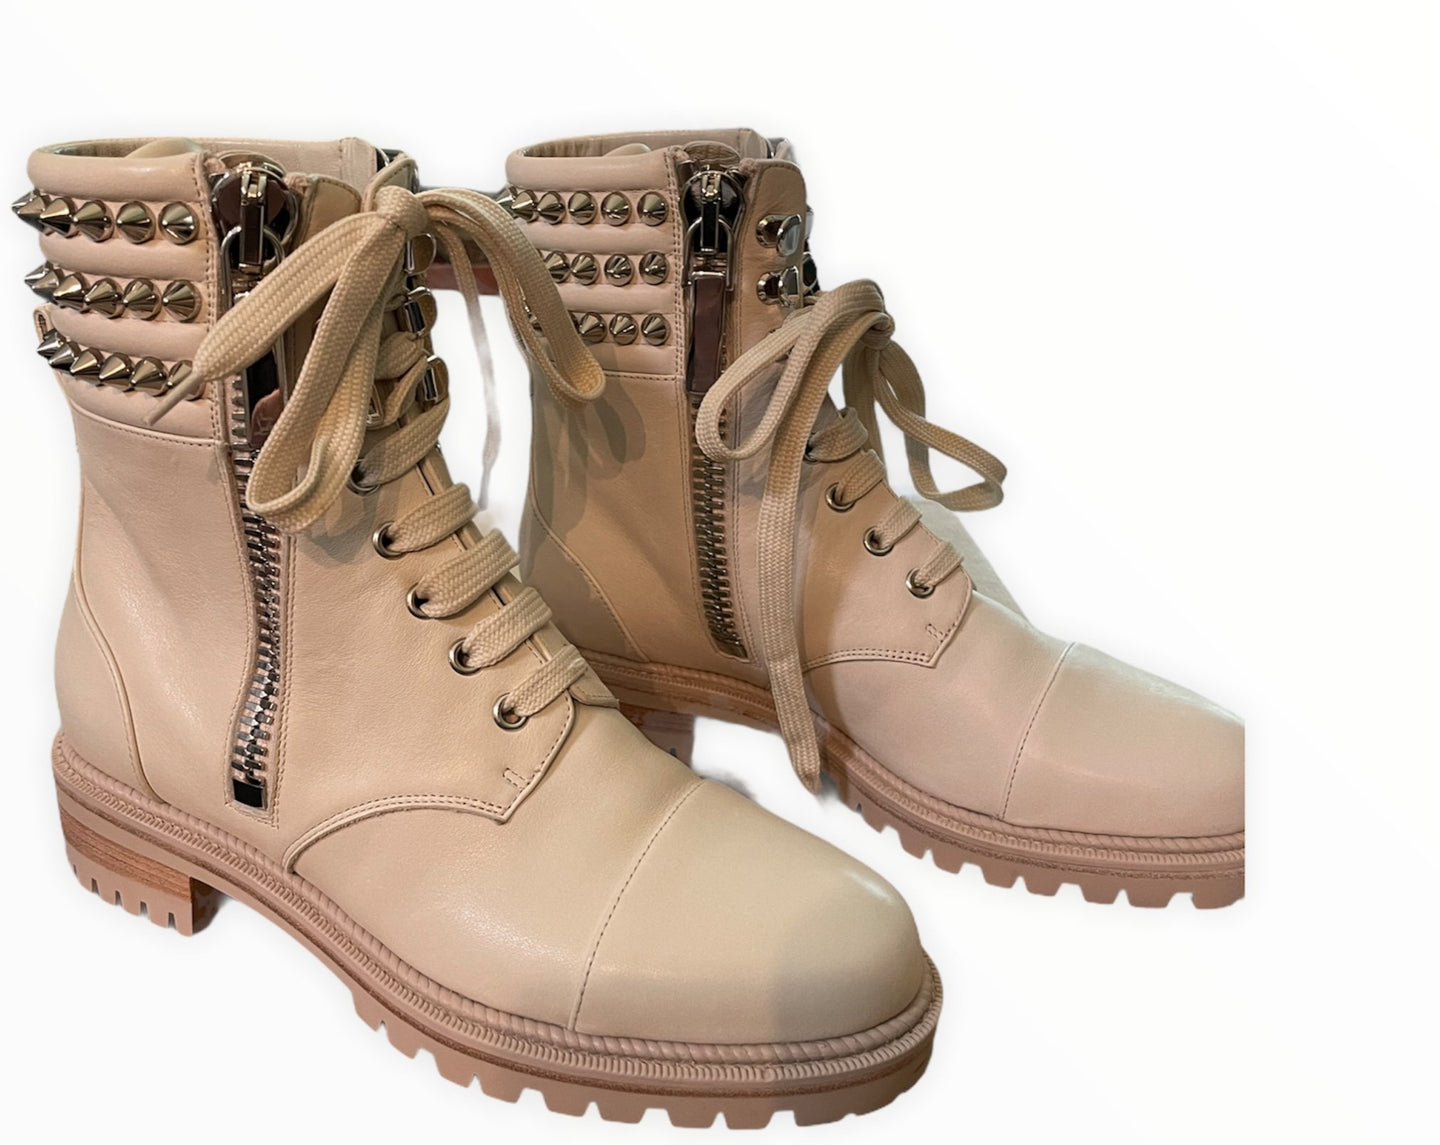 Christian Louboutin Winter White Spike Combat Boots